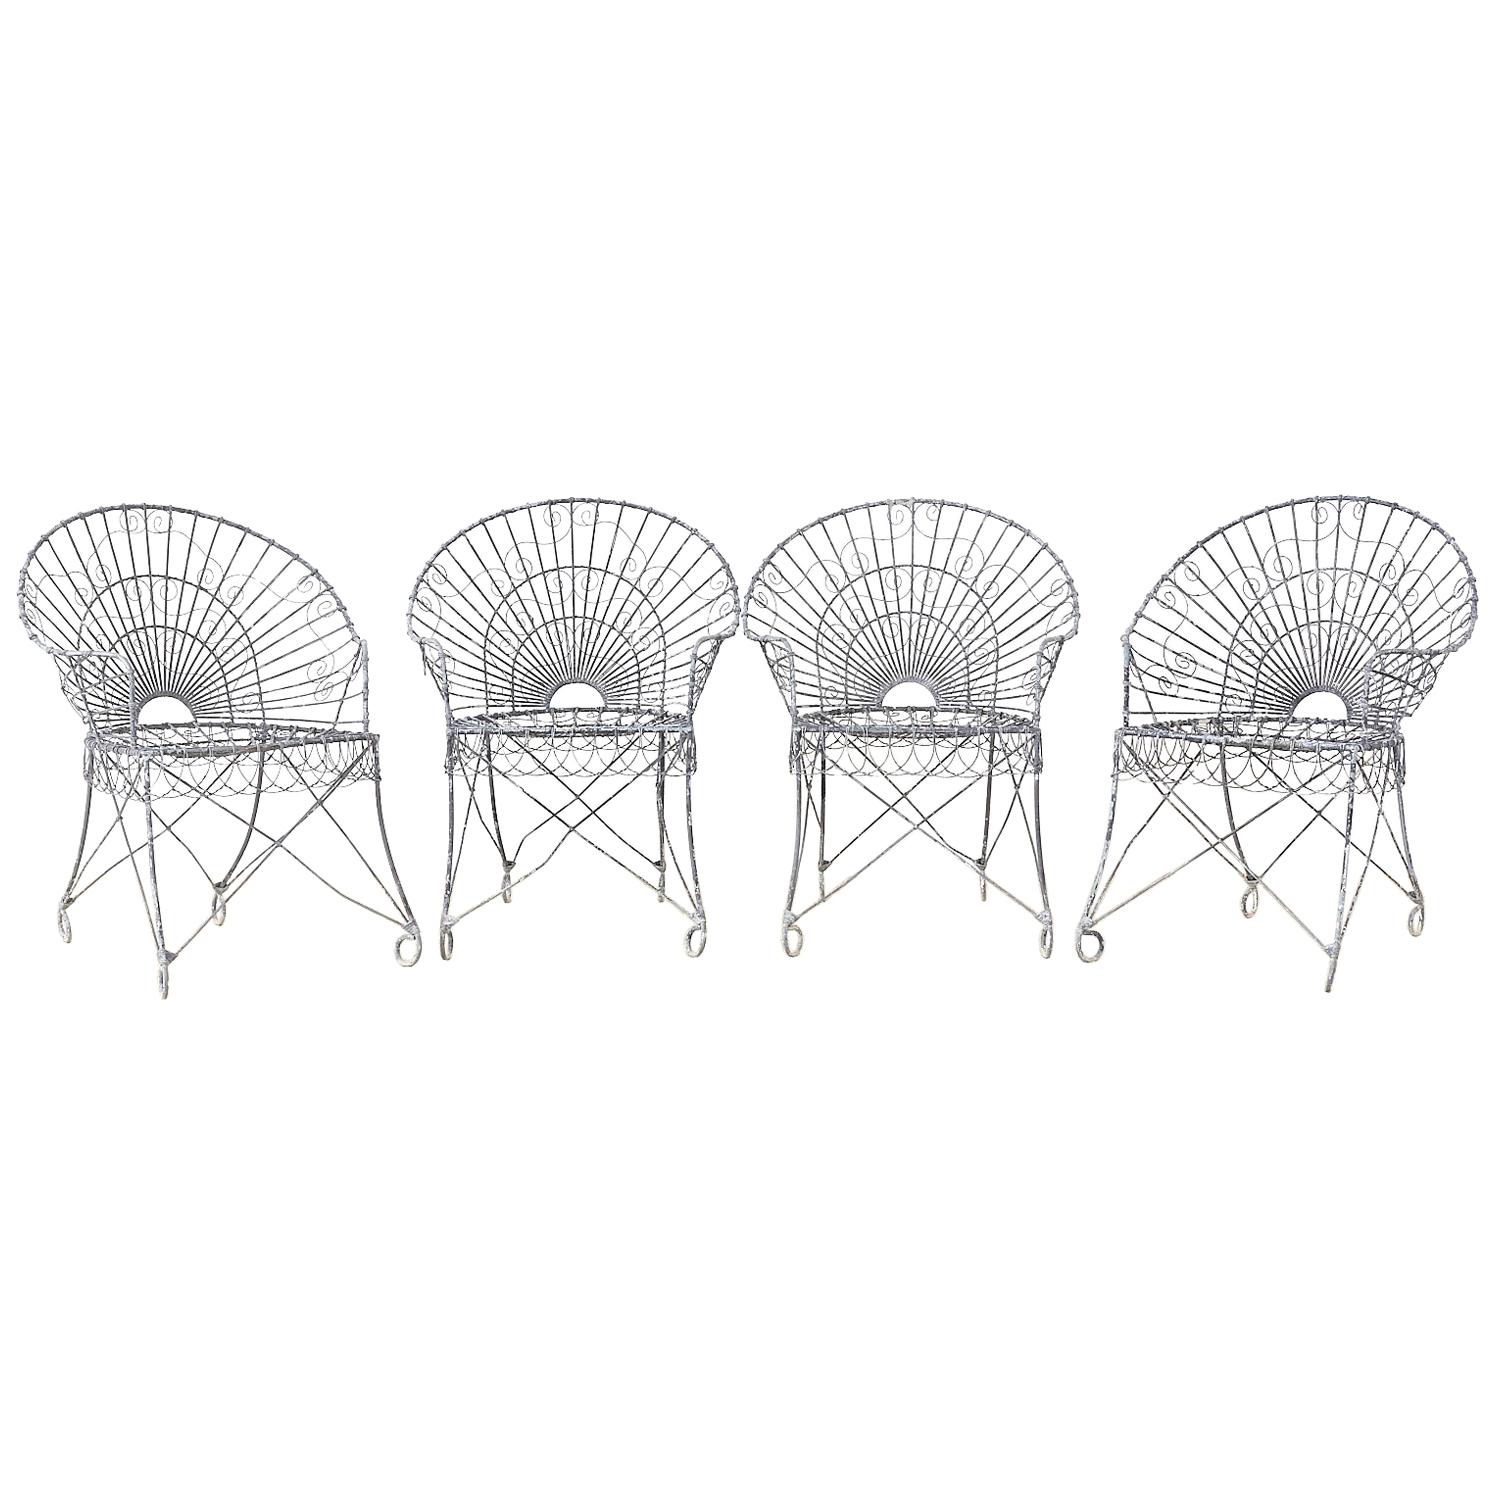 Set of Four French Iron and Wire Garden Chairs